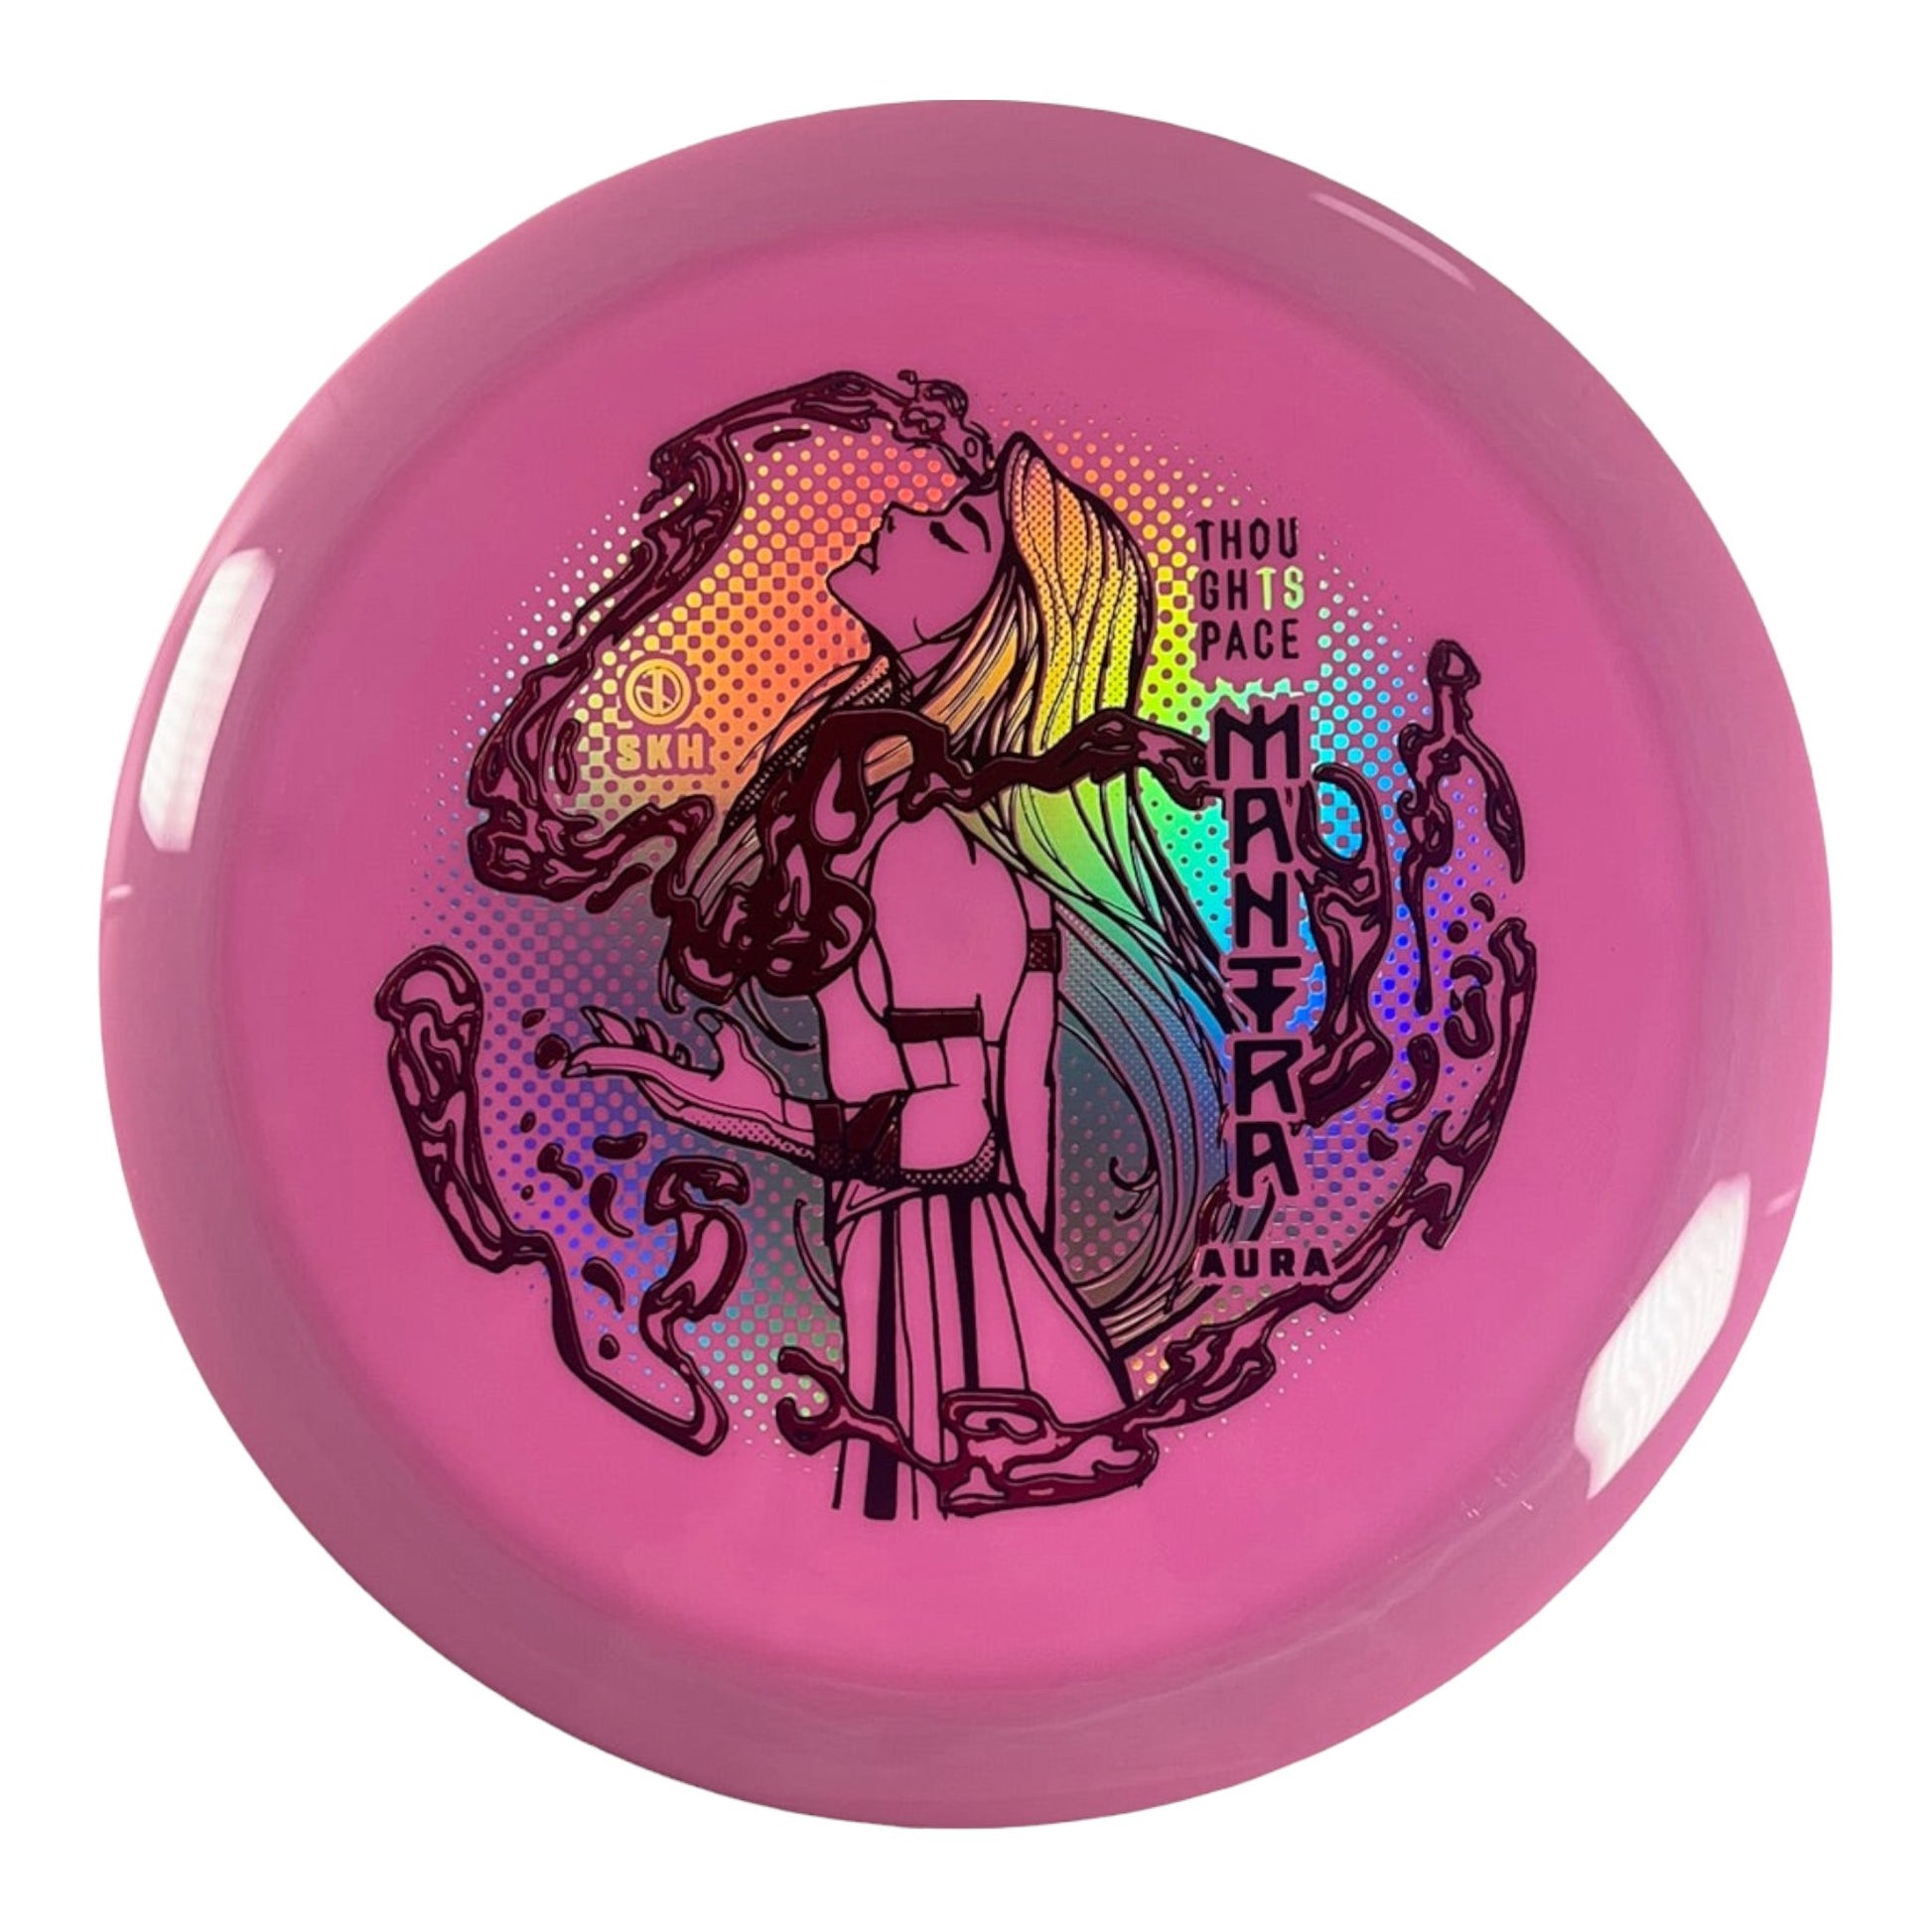 Thought Space Athletics Mantra | Aura | Pink/Red 175g Disc Golf